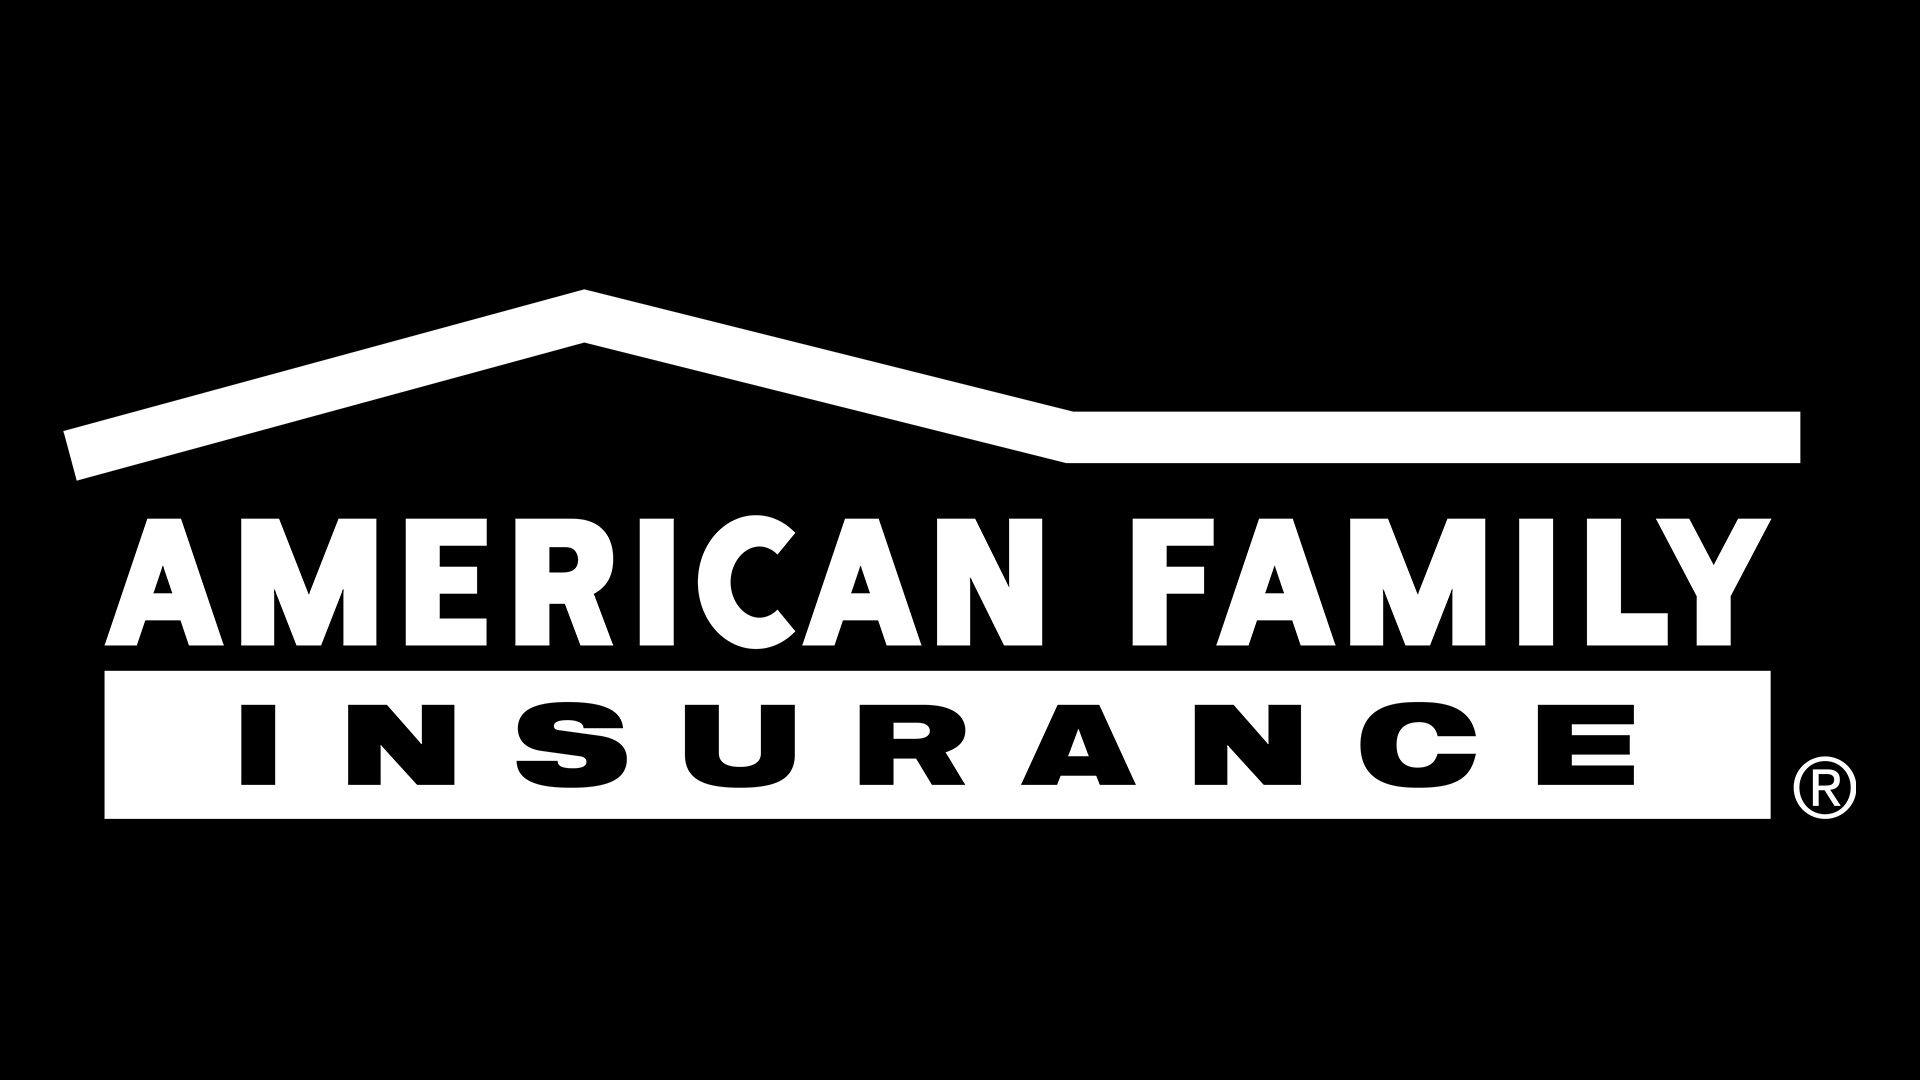 AmFam Logo - American Family Insurance logo, symbol, meaning, History and Evolution